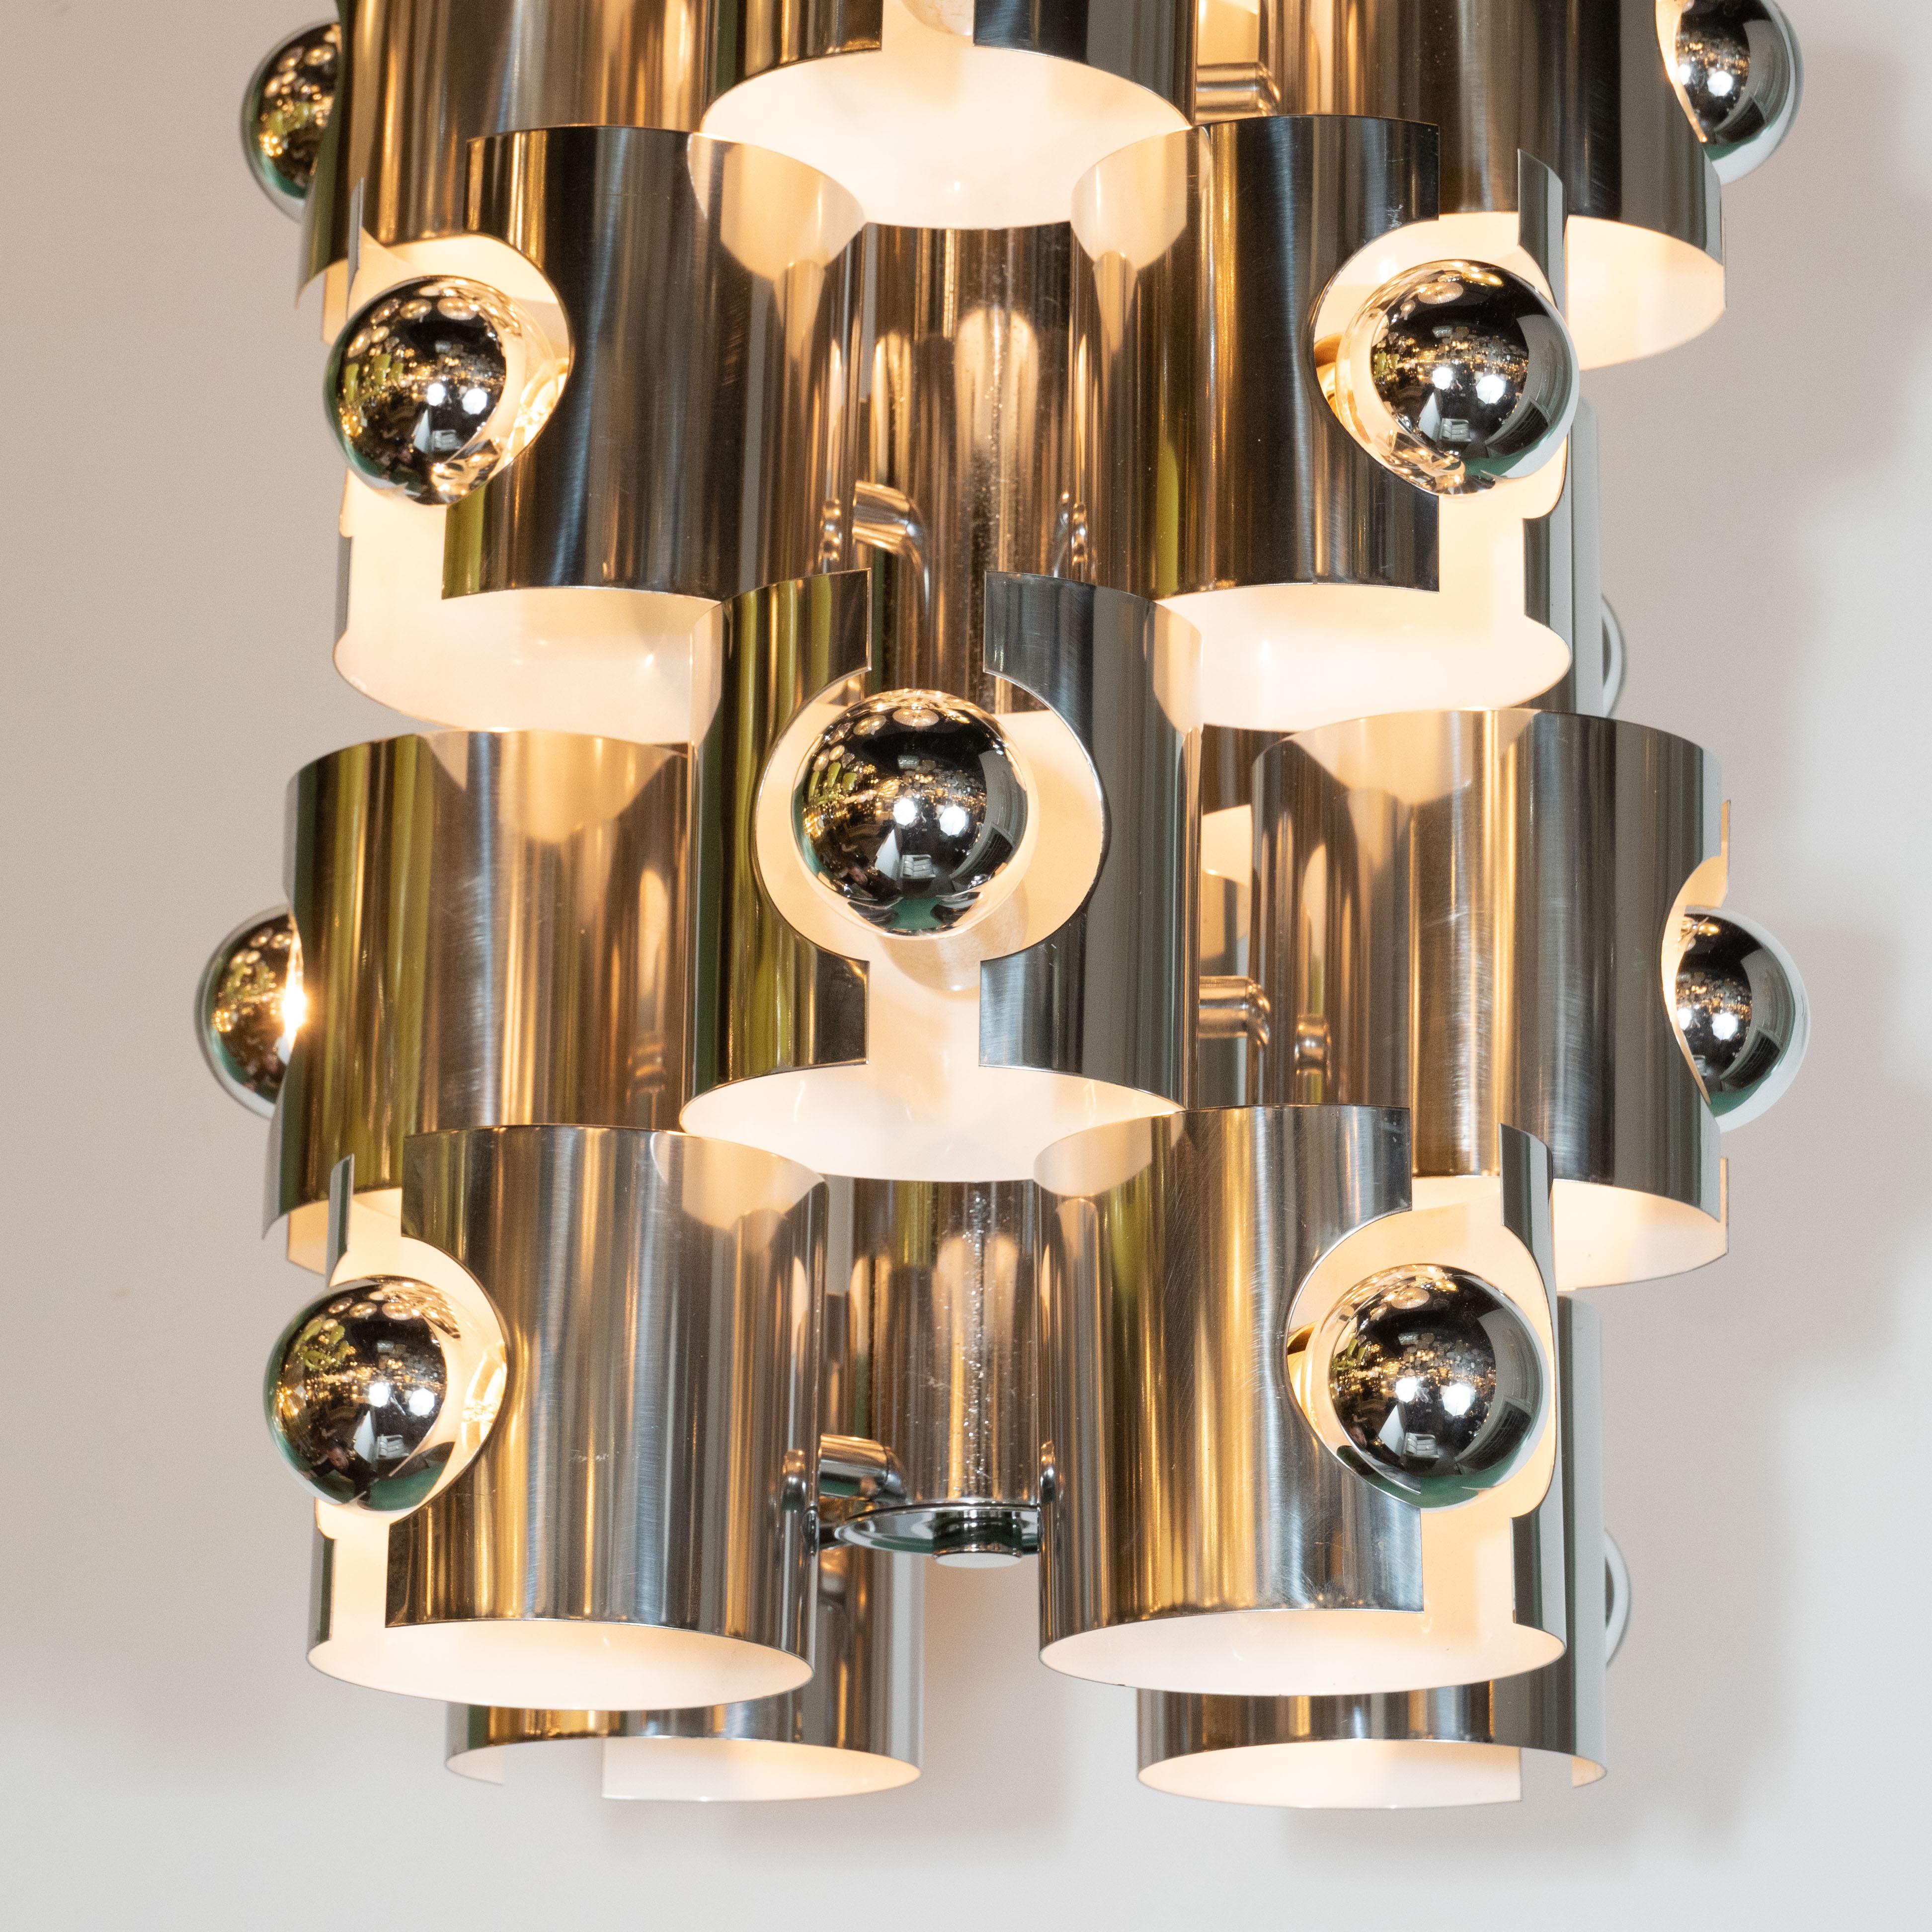 Late 20th Century Italian Mid-Century Modern Sculptural Polished Chrome Chandelier by Sciolari For Sale